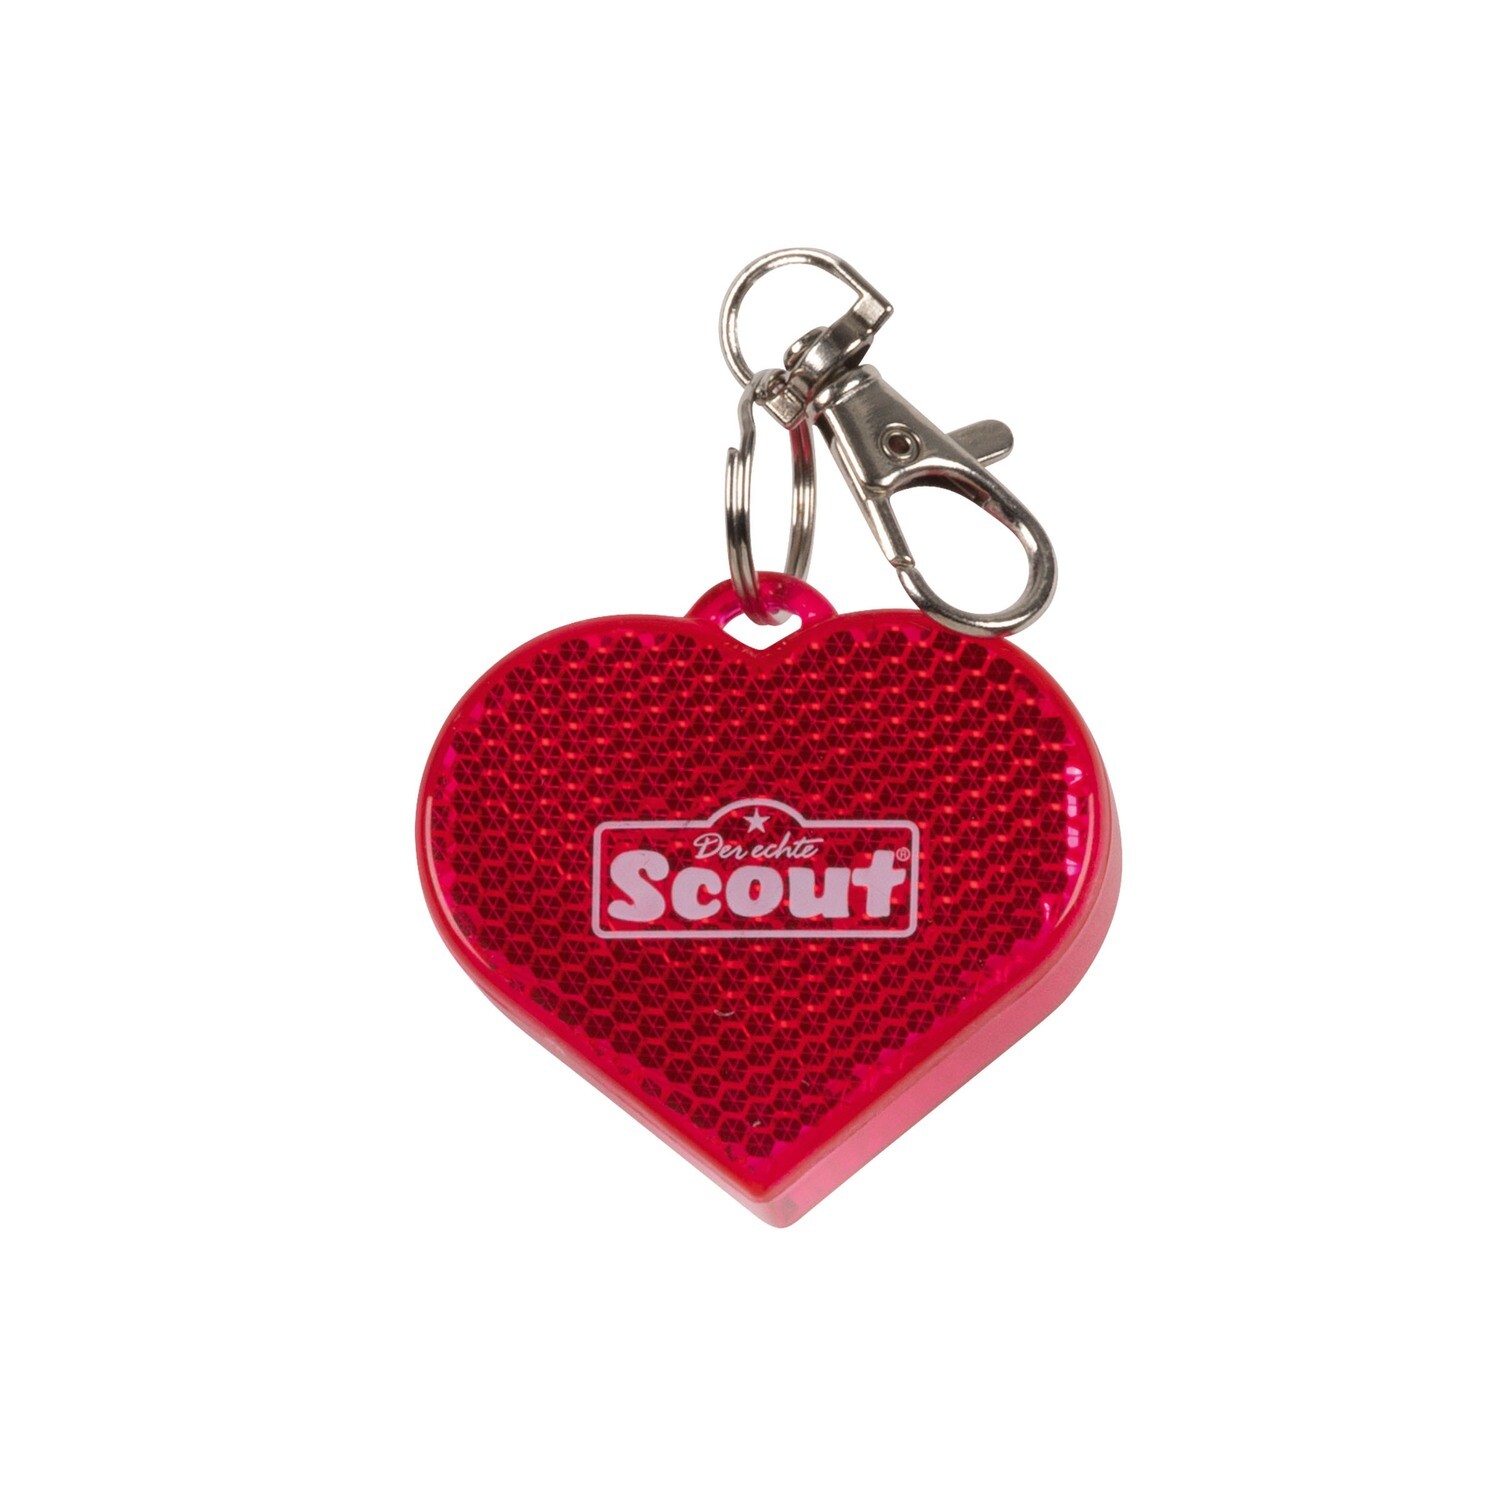 Scout Blinky "Pink Heart"